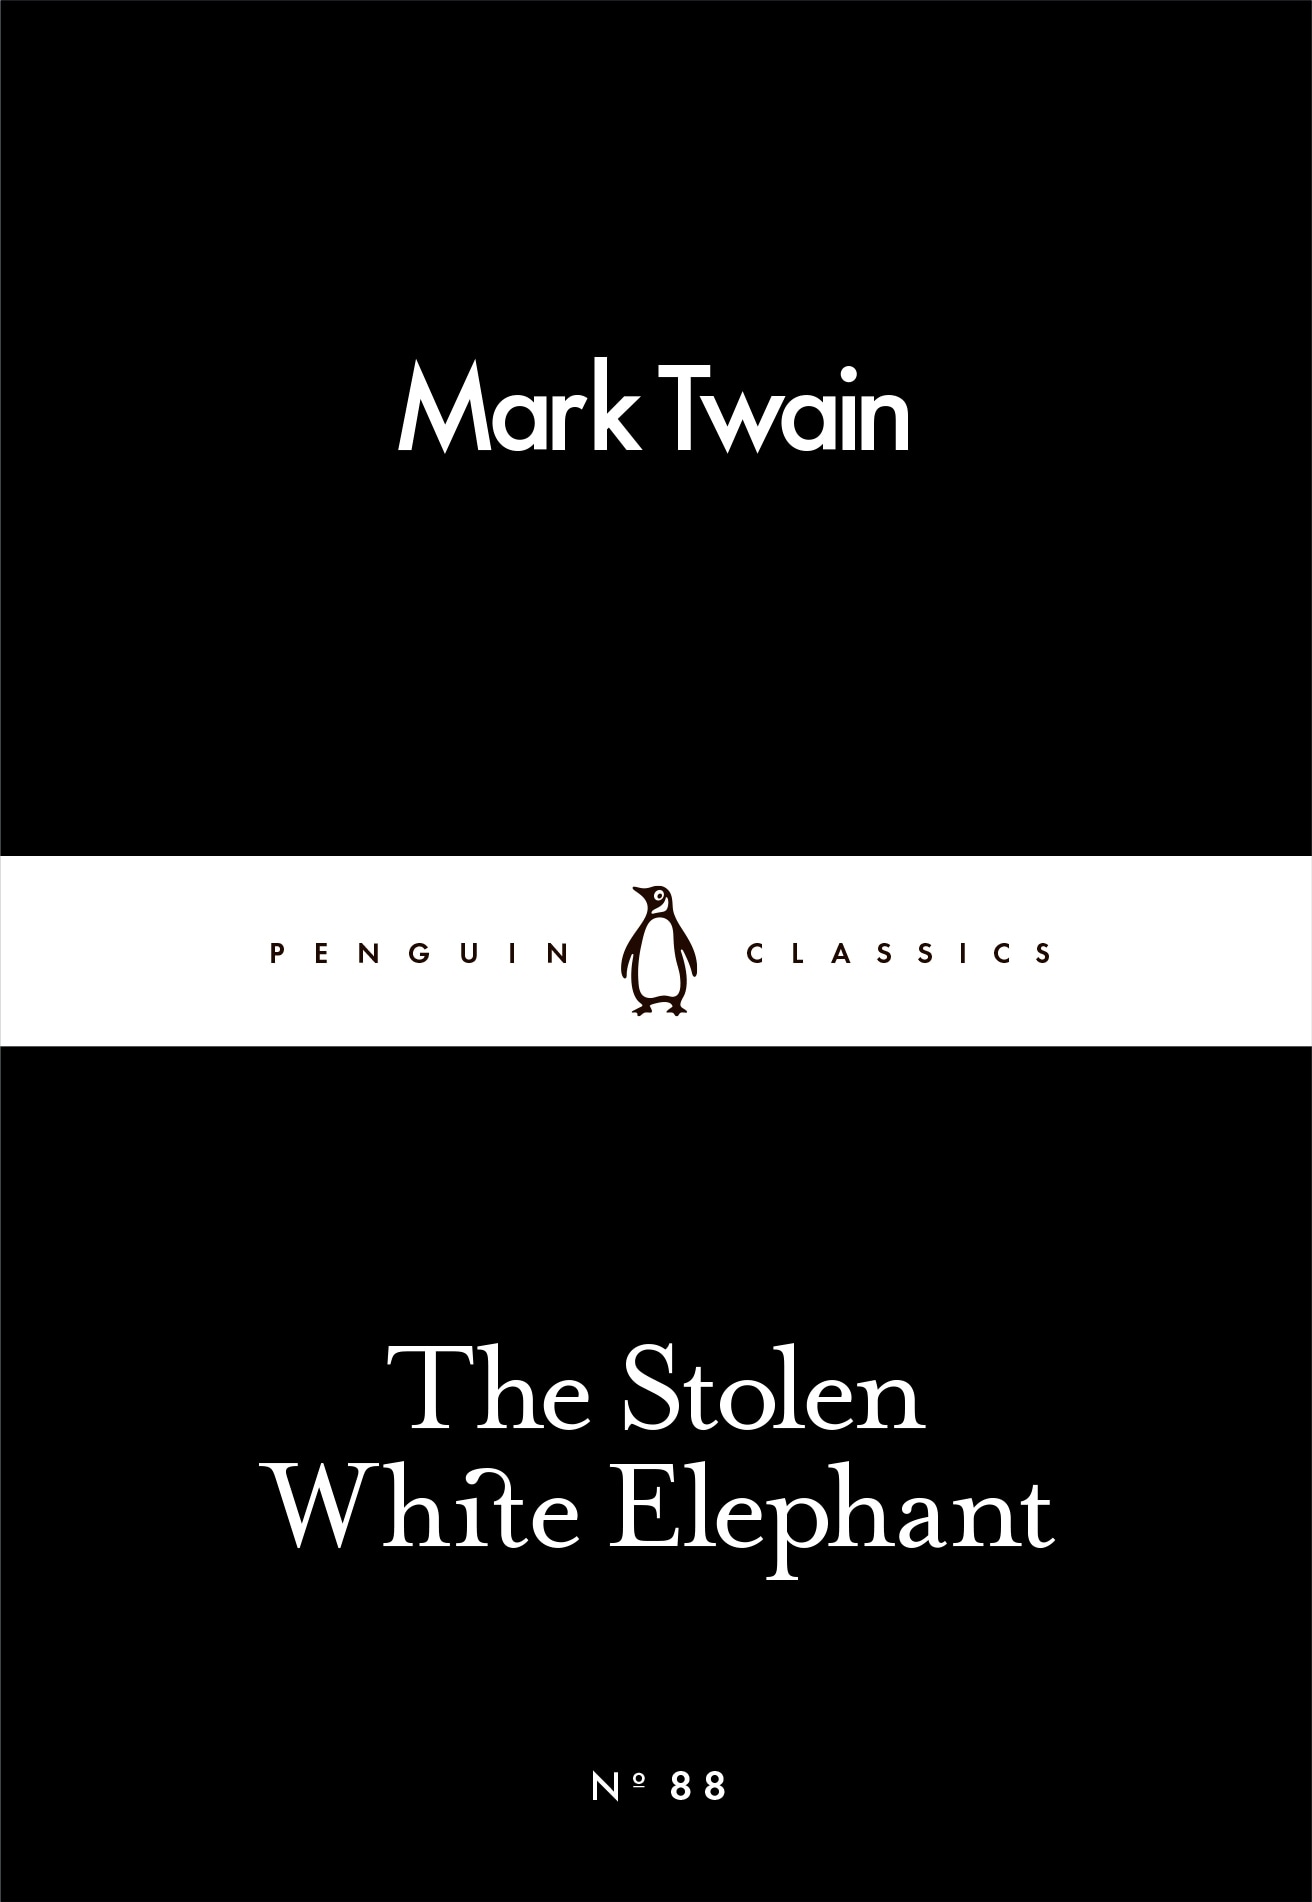 Book “The Stolen White Elephant” by Mark Twain — March 3, 2016